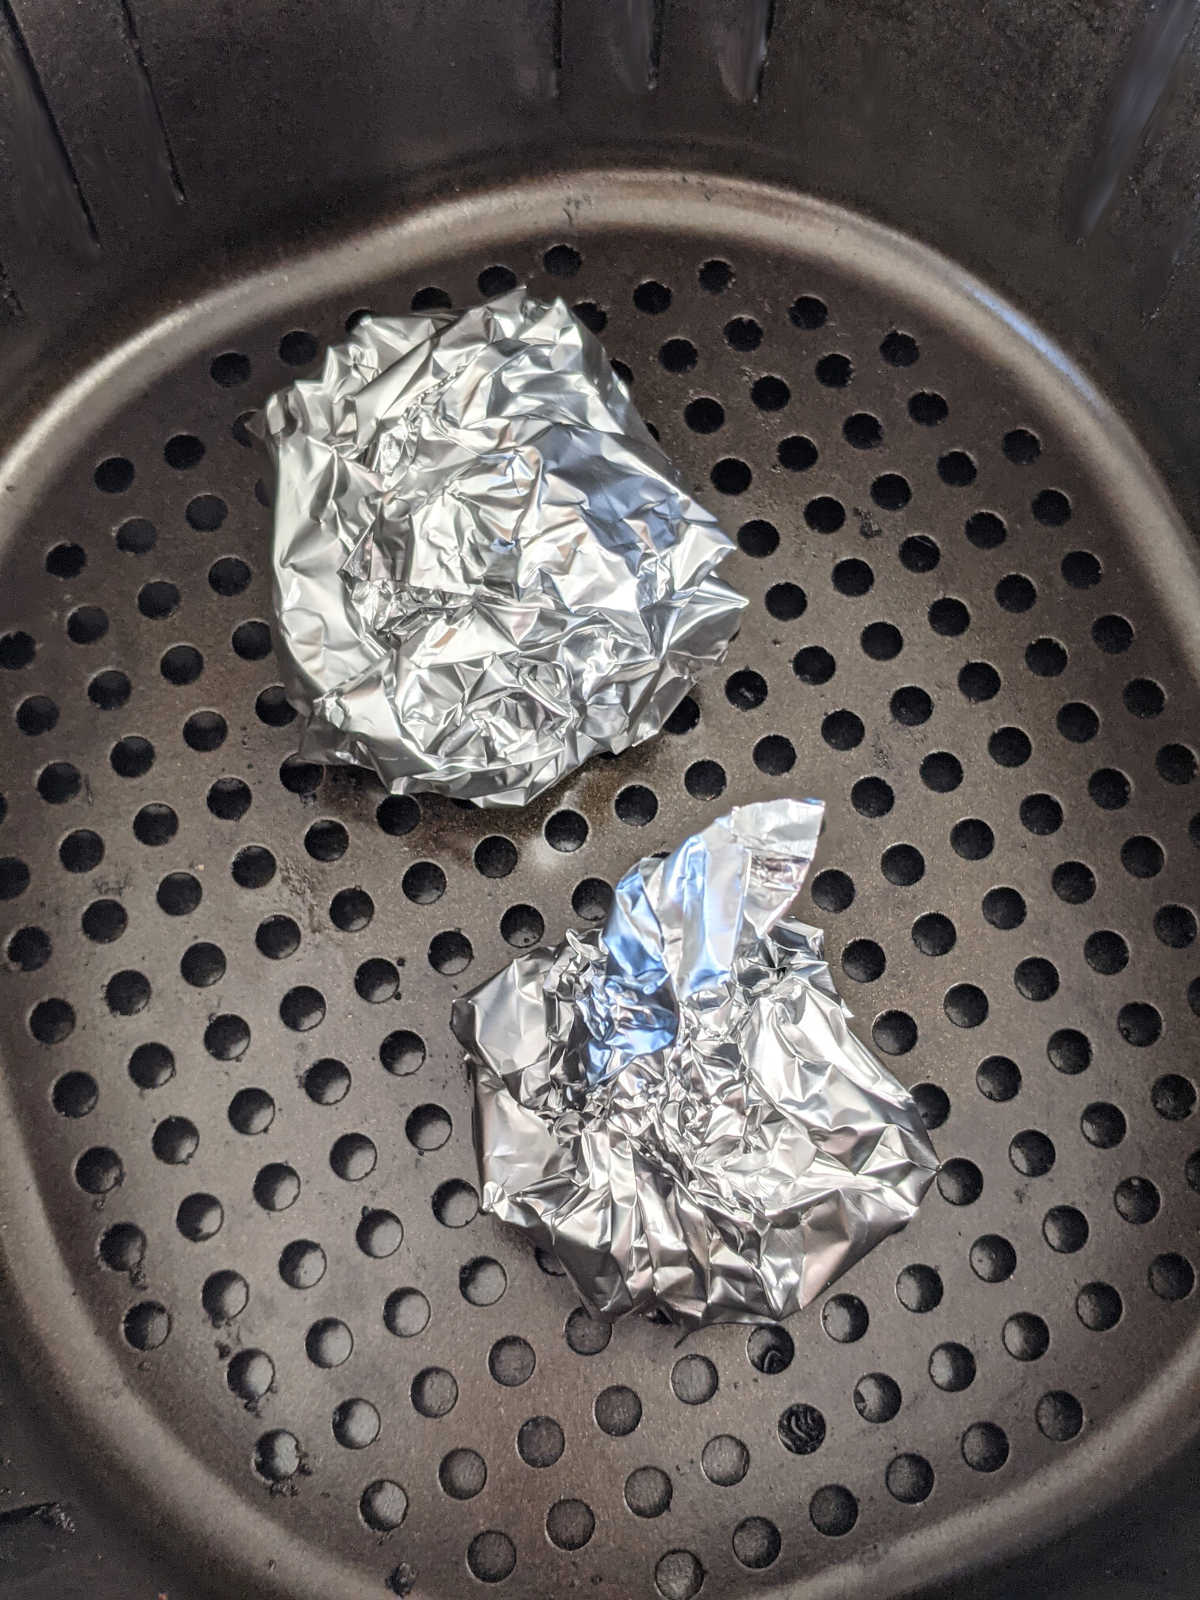 Garlic bulbs wrapped in foil and sitting in an air fryer basket.